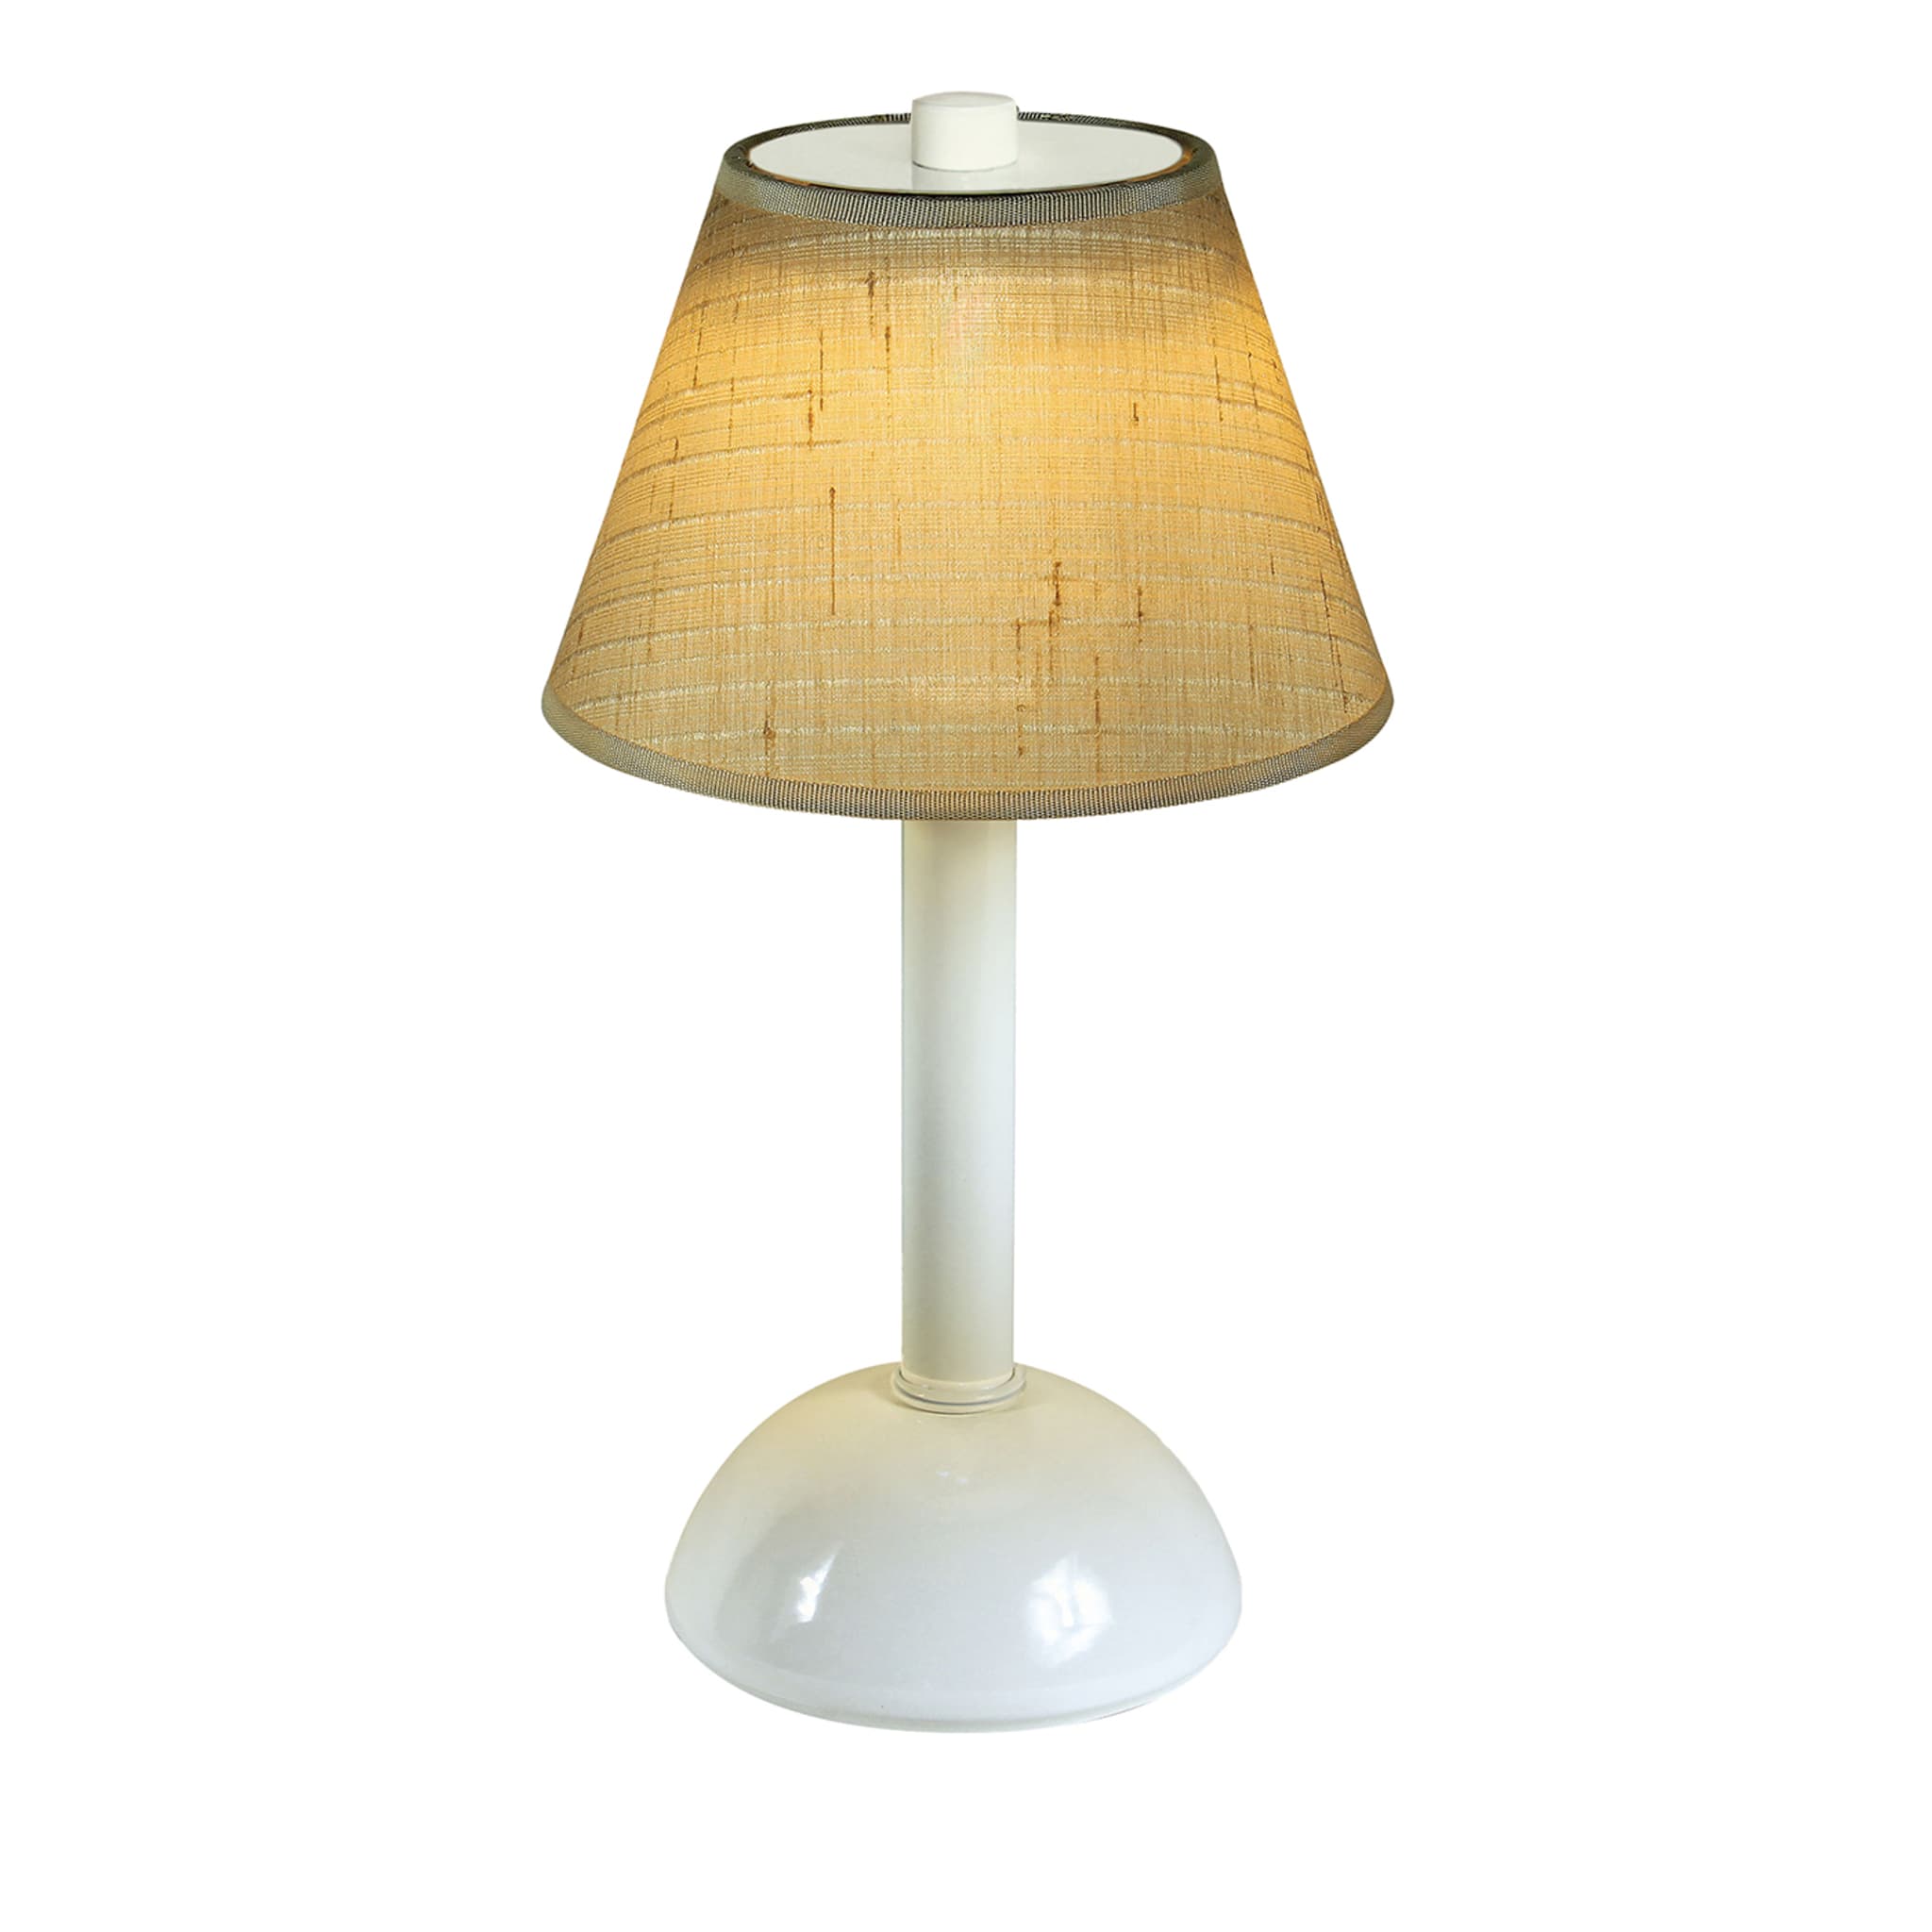 Moon Soria Avorio White Table Lamp by Stefano Tabarin - Main view